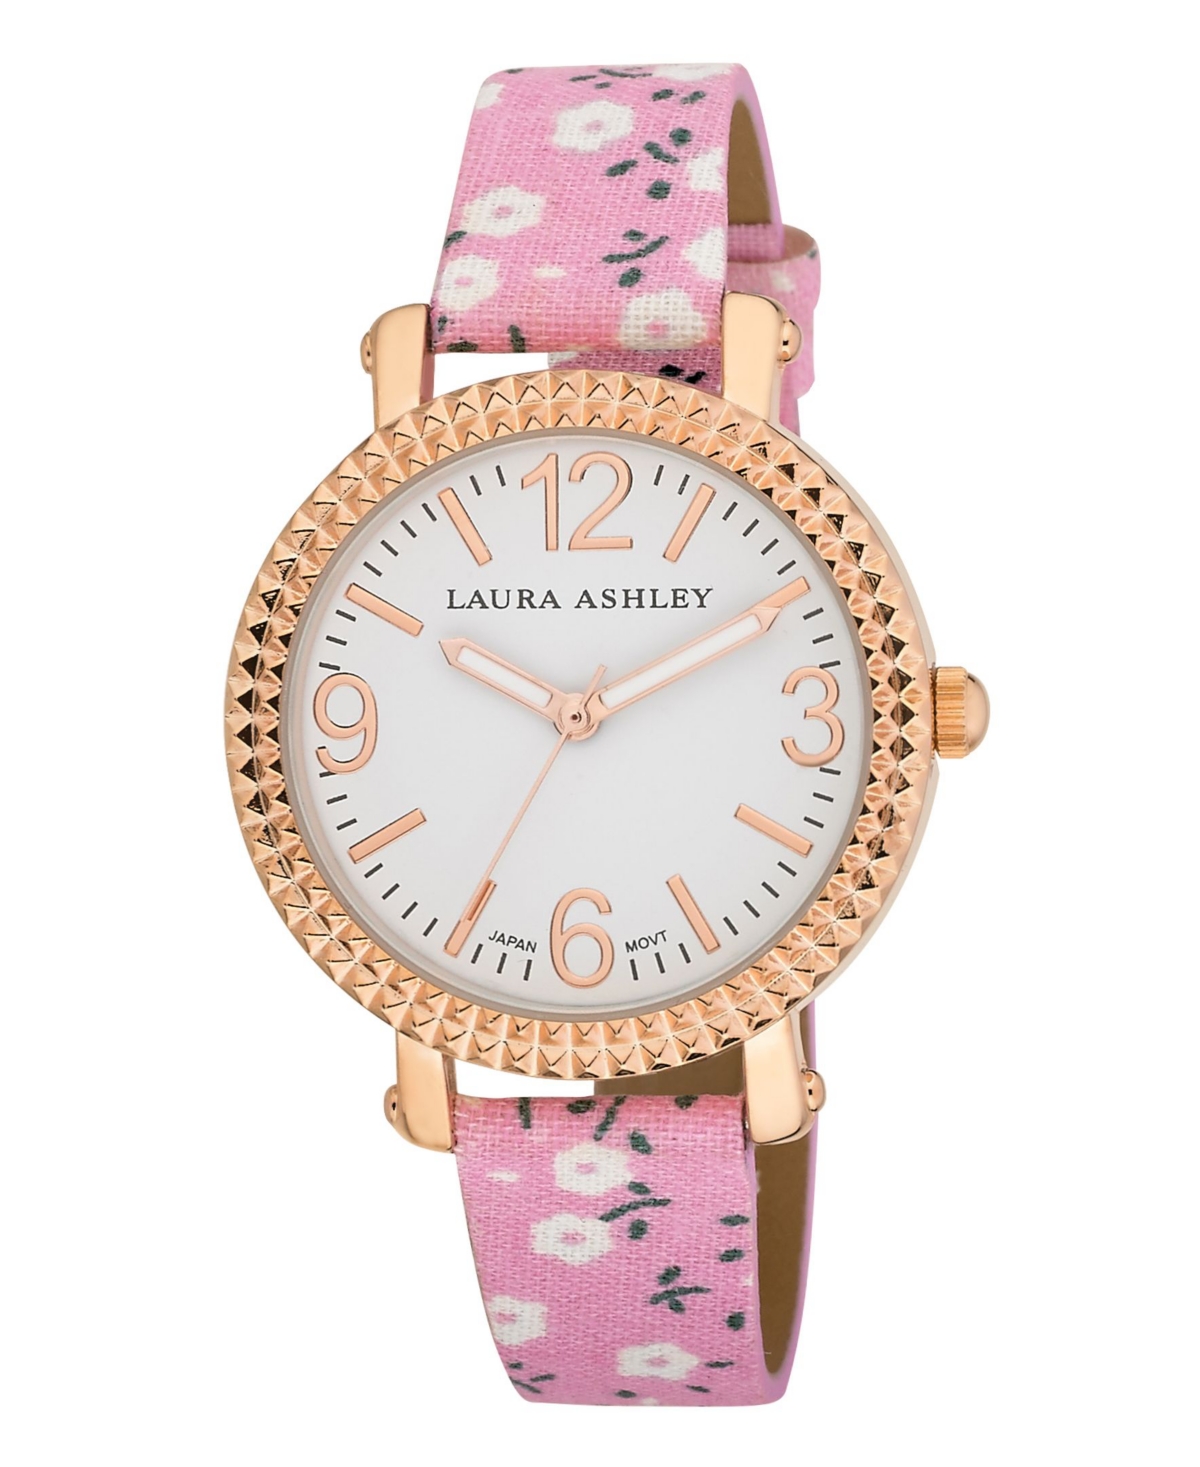 Women's Pink Floral Band Fluted Bezel Watch - Multi